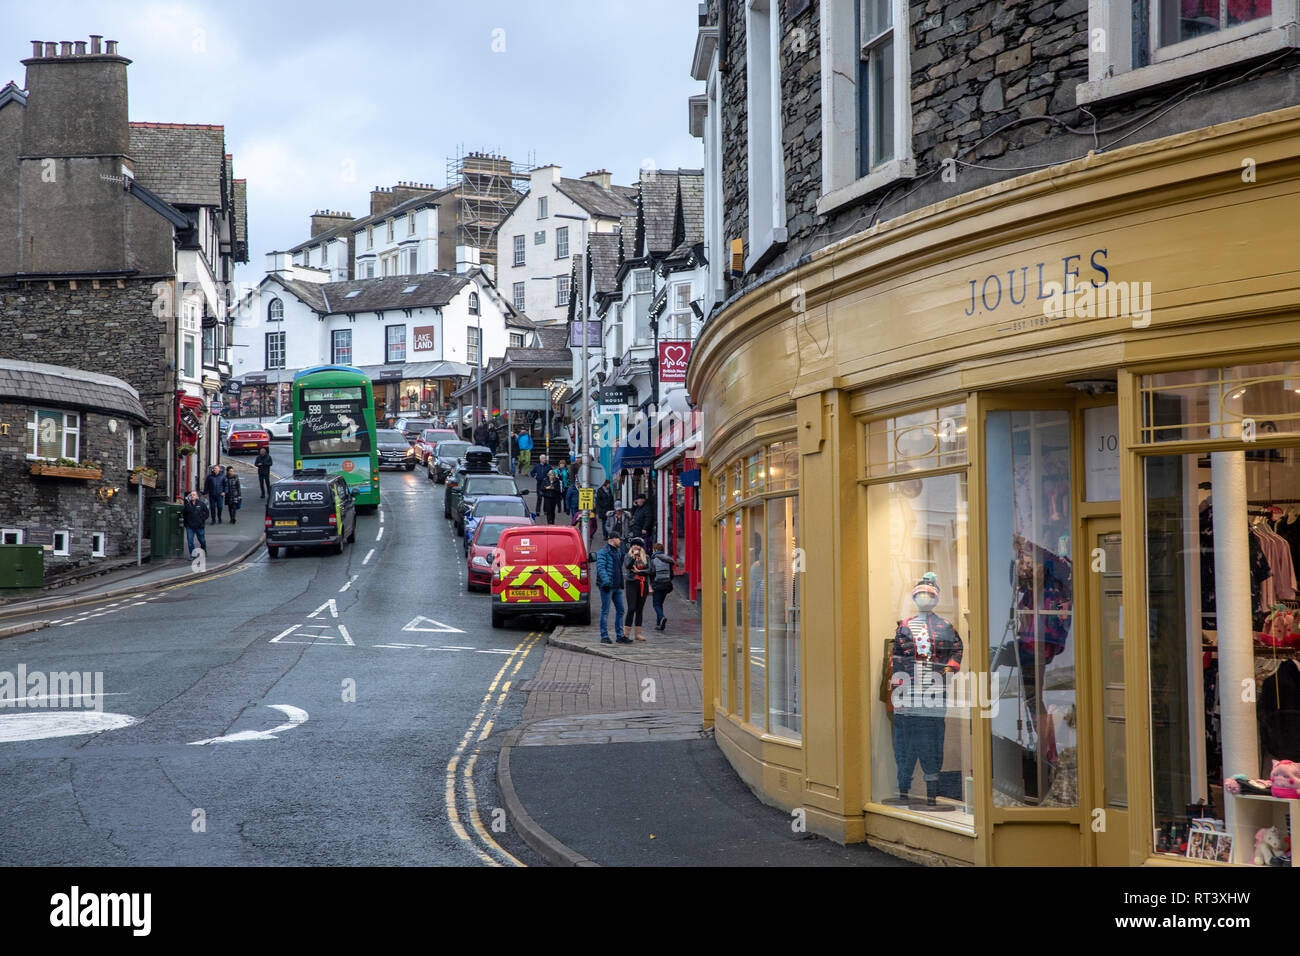 Joules clothing store in Bowness on Windermere, Lake District,England Stock Photo